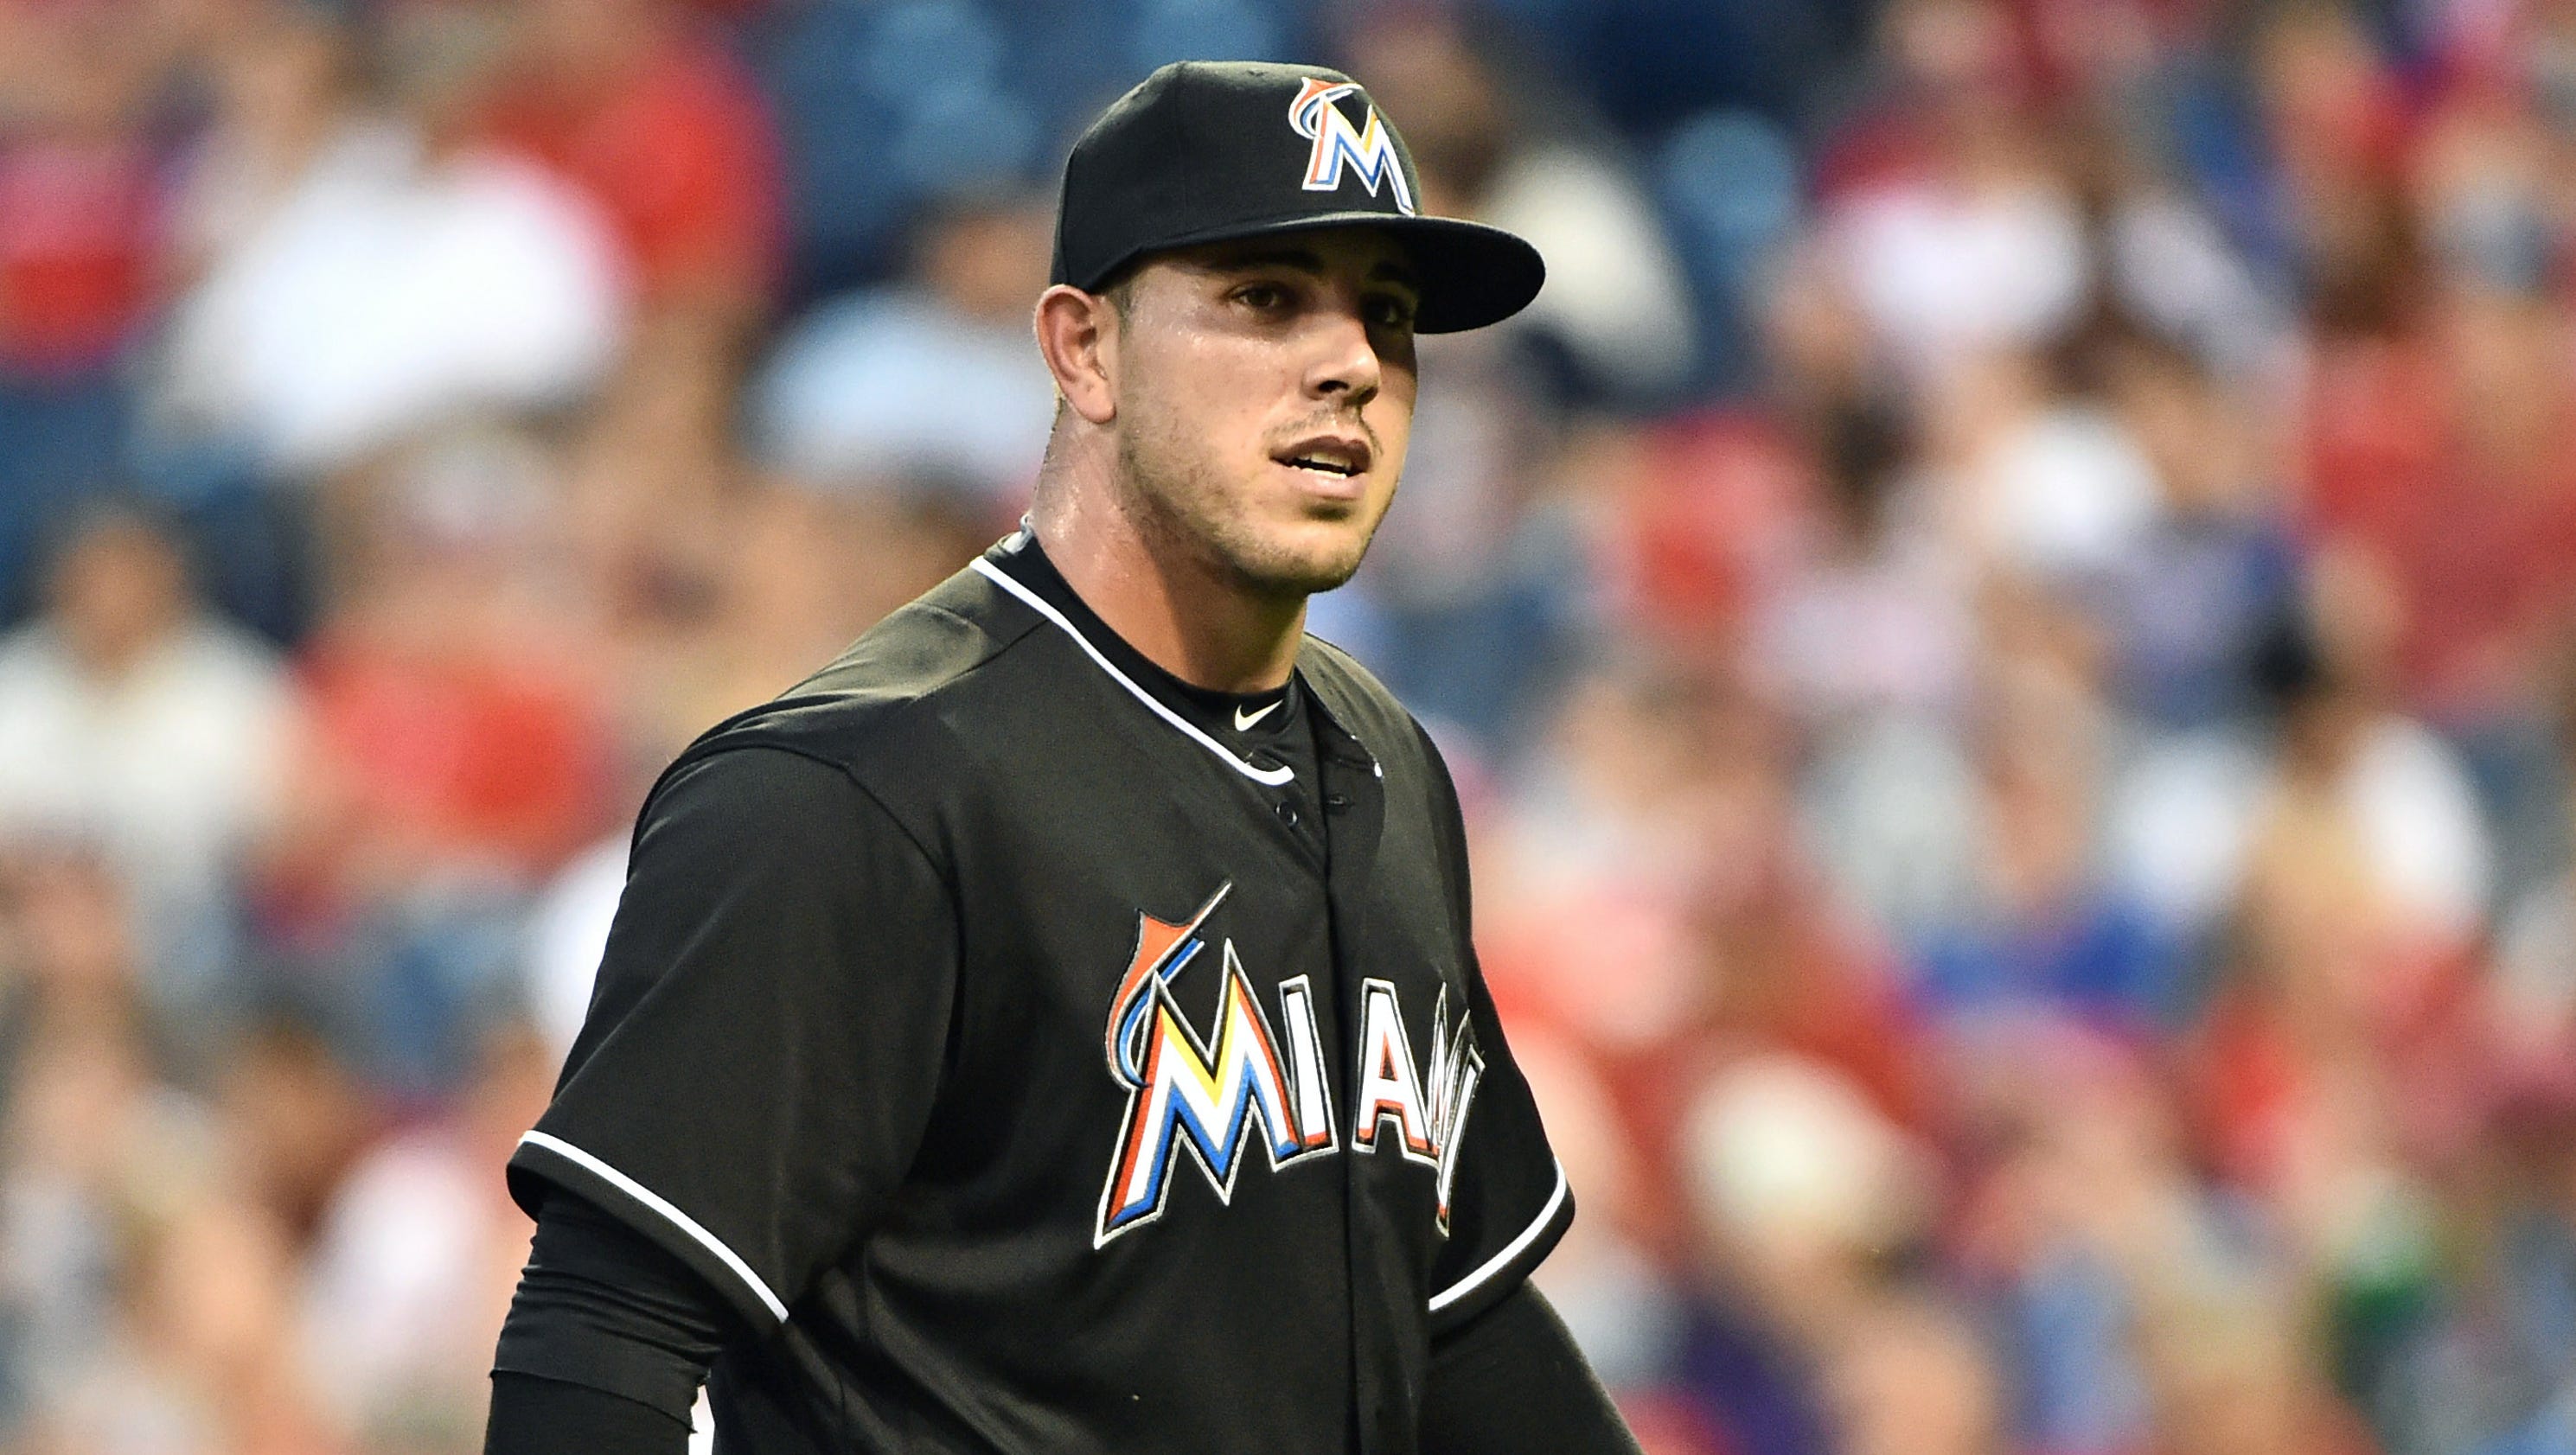 Official: Jose Fernandez died from crash impact, not drowning3200 x 1680